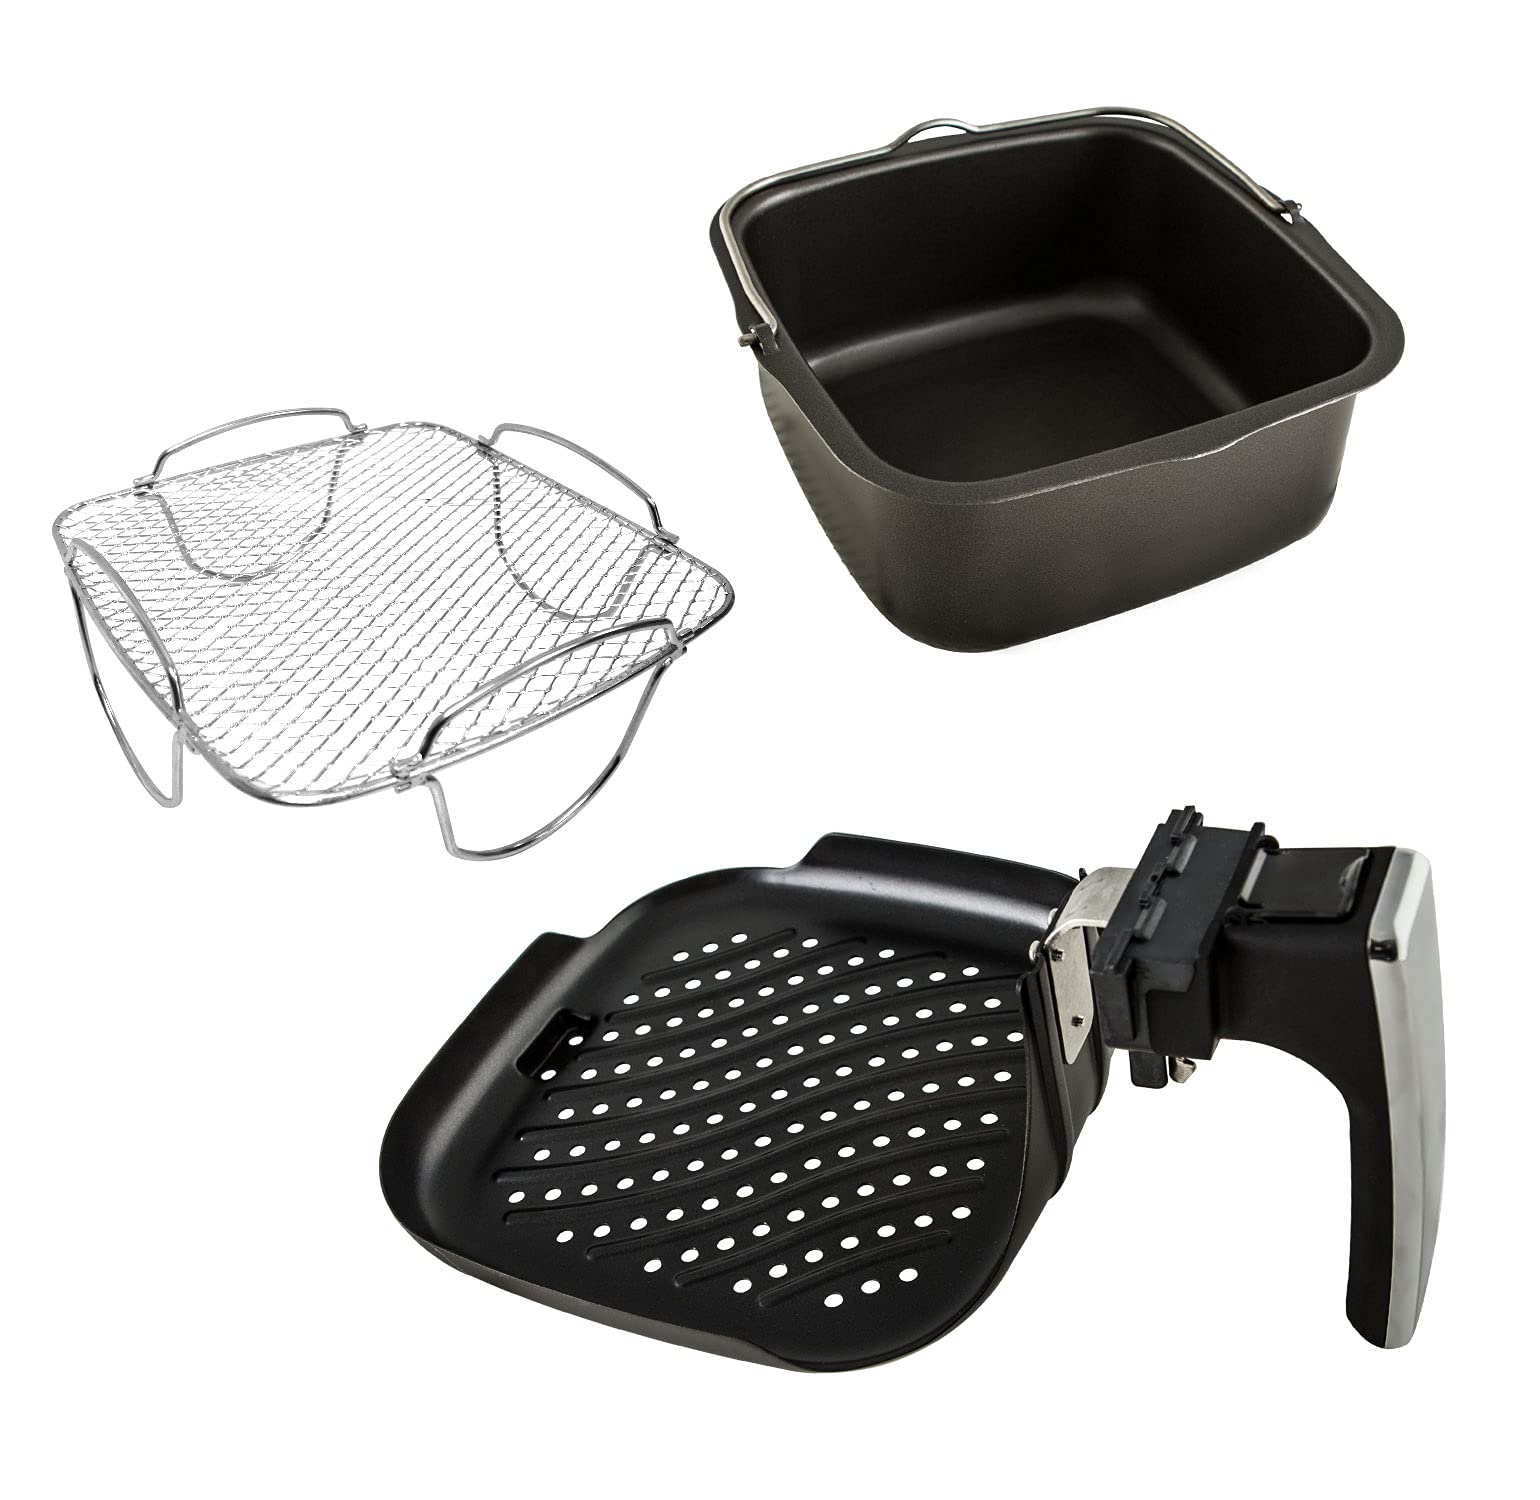 NuWave 3QT Brio Digital Air Fryer Accessory Kit - Includes Stainless Steel Baking Pan, Reversible cooking Rack & grill Pan, comp